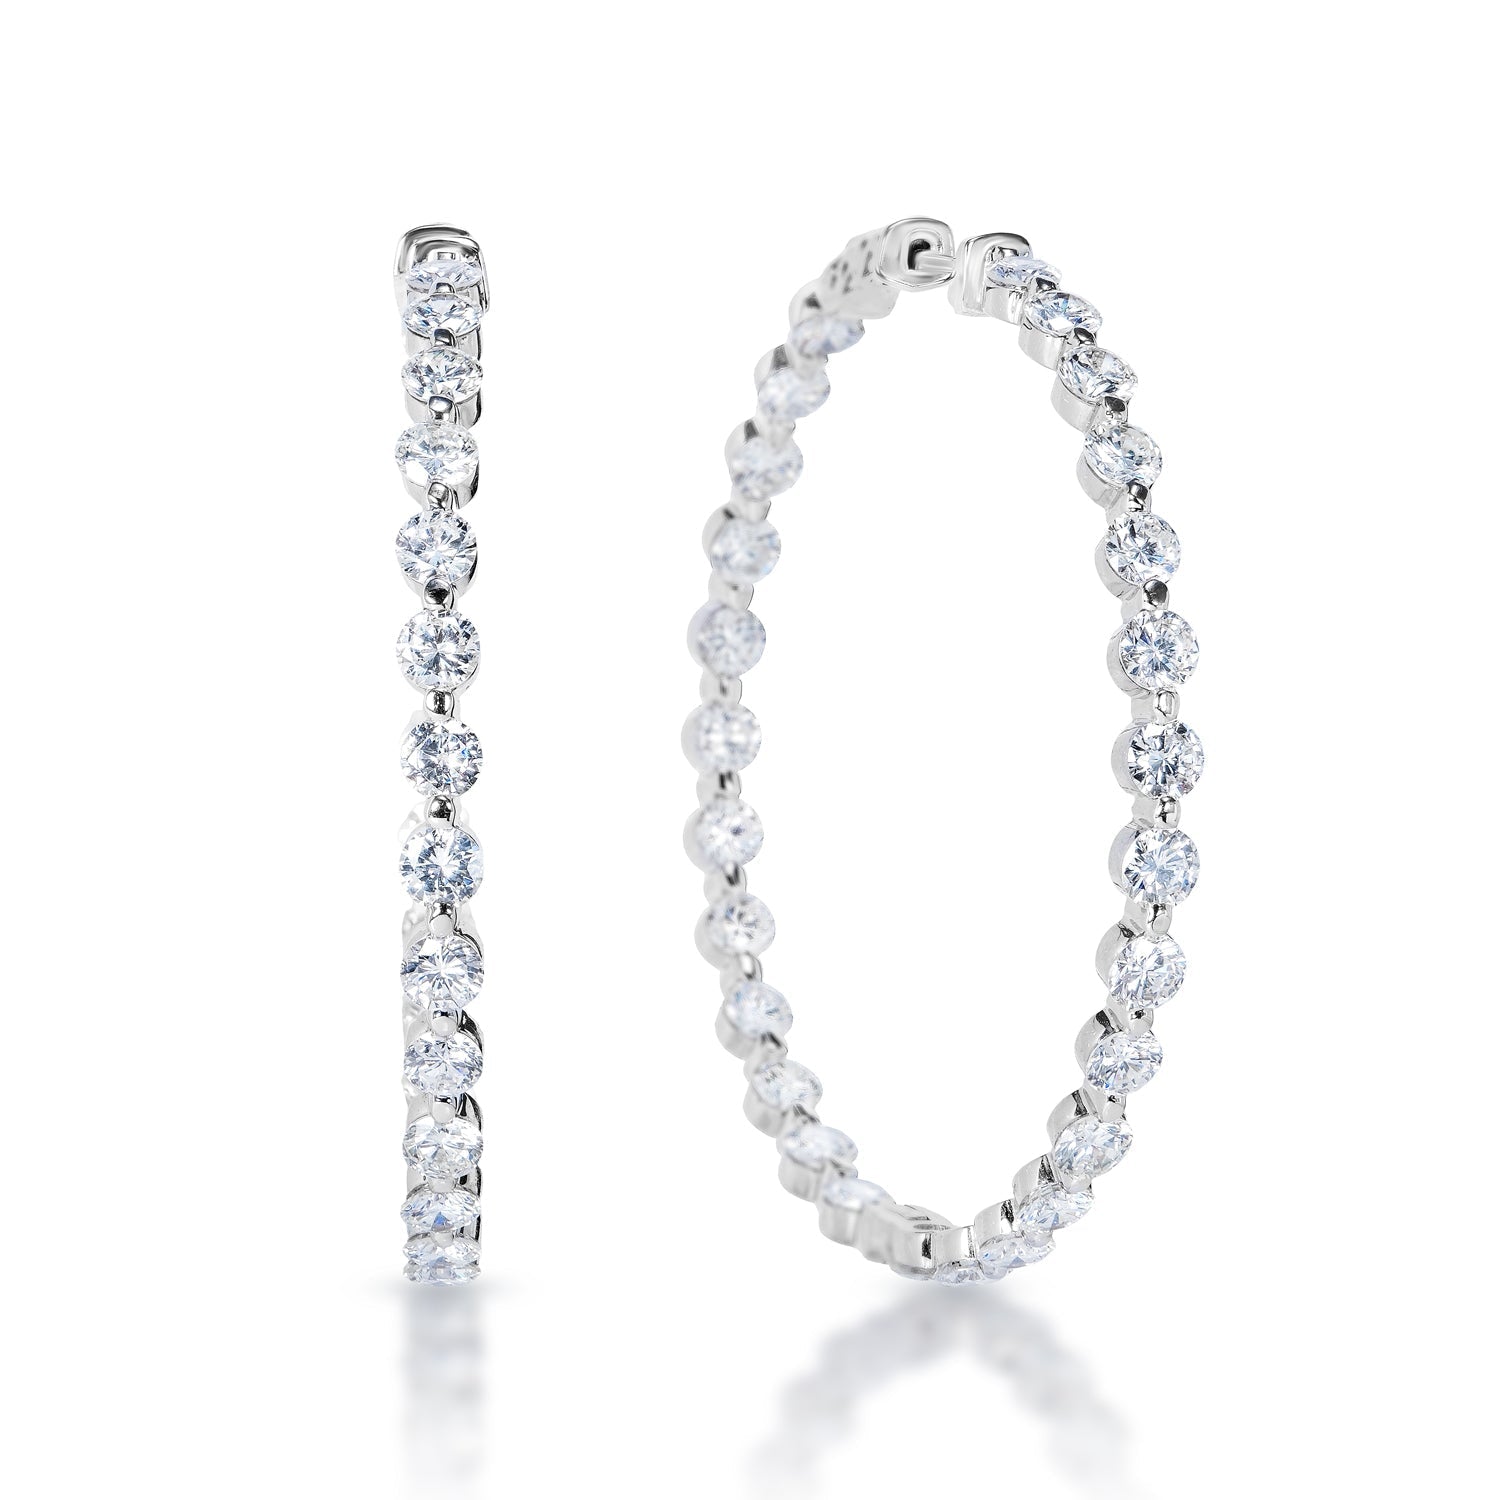 Karissa 10 Carat Round Brilliant Diamond Hoop Earrings in 18k White Gold Front and Side View